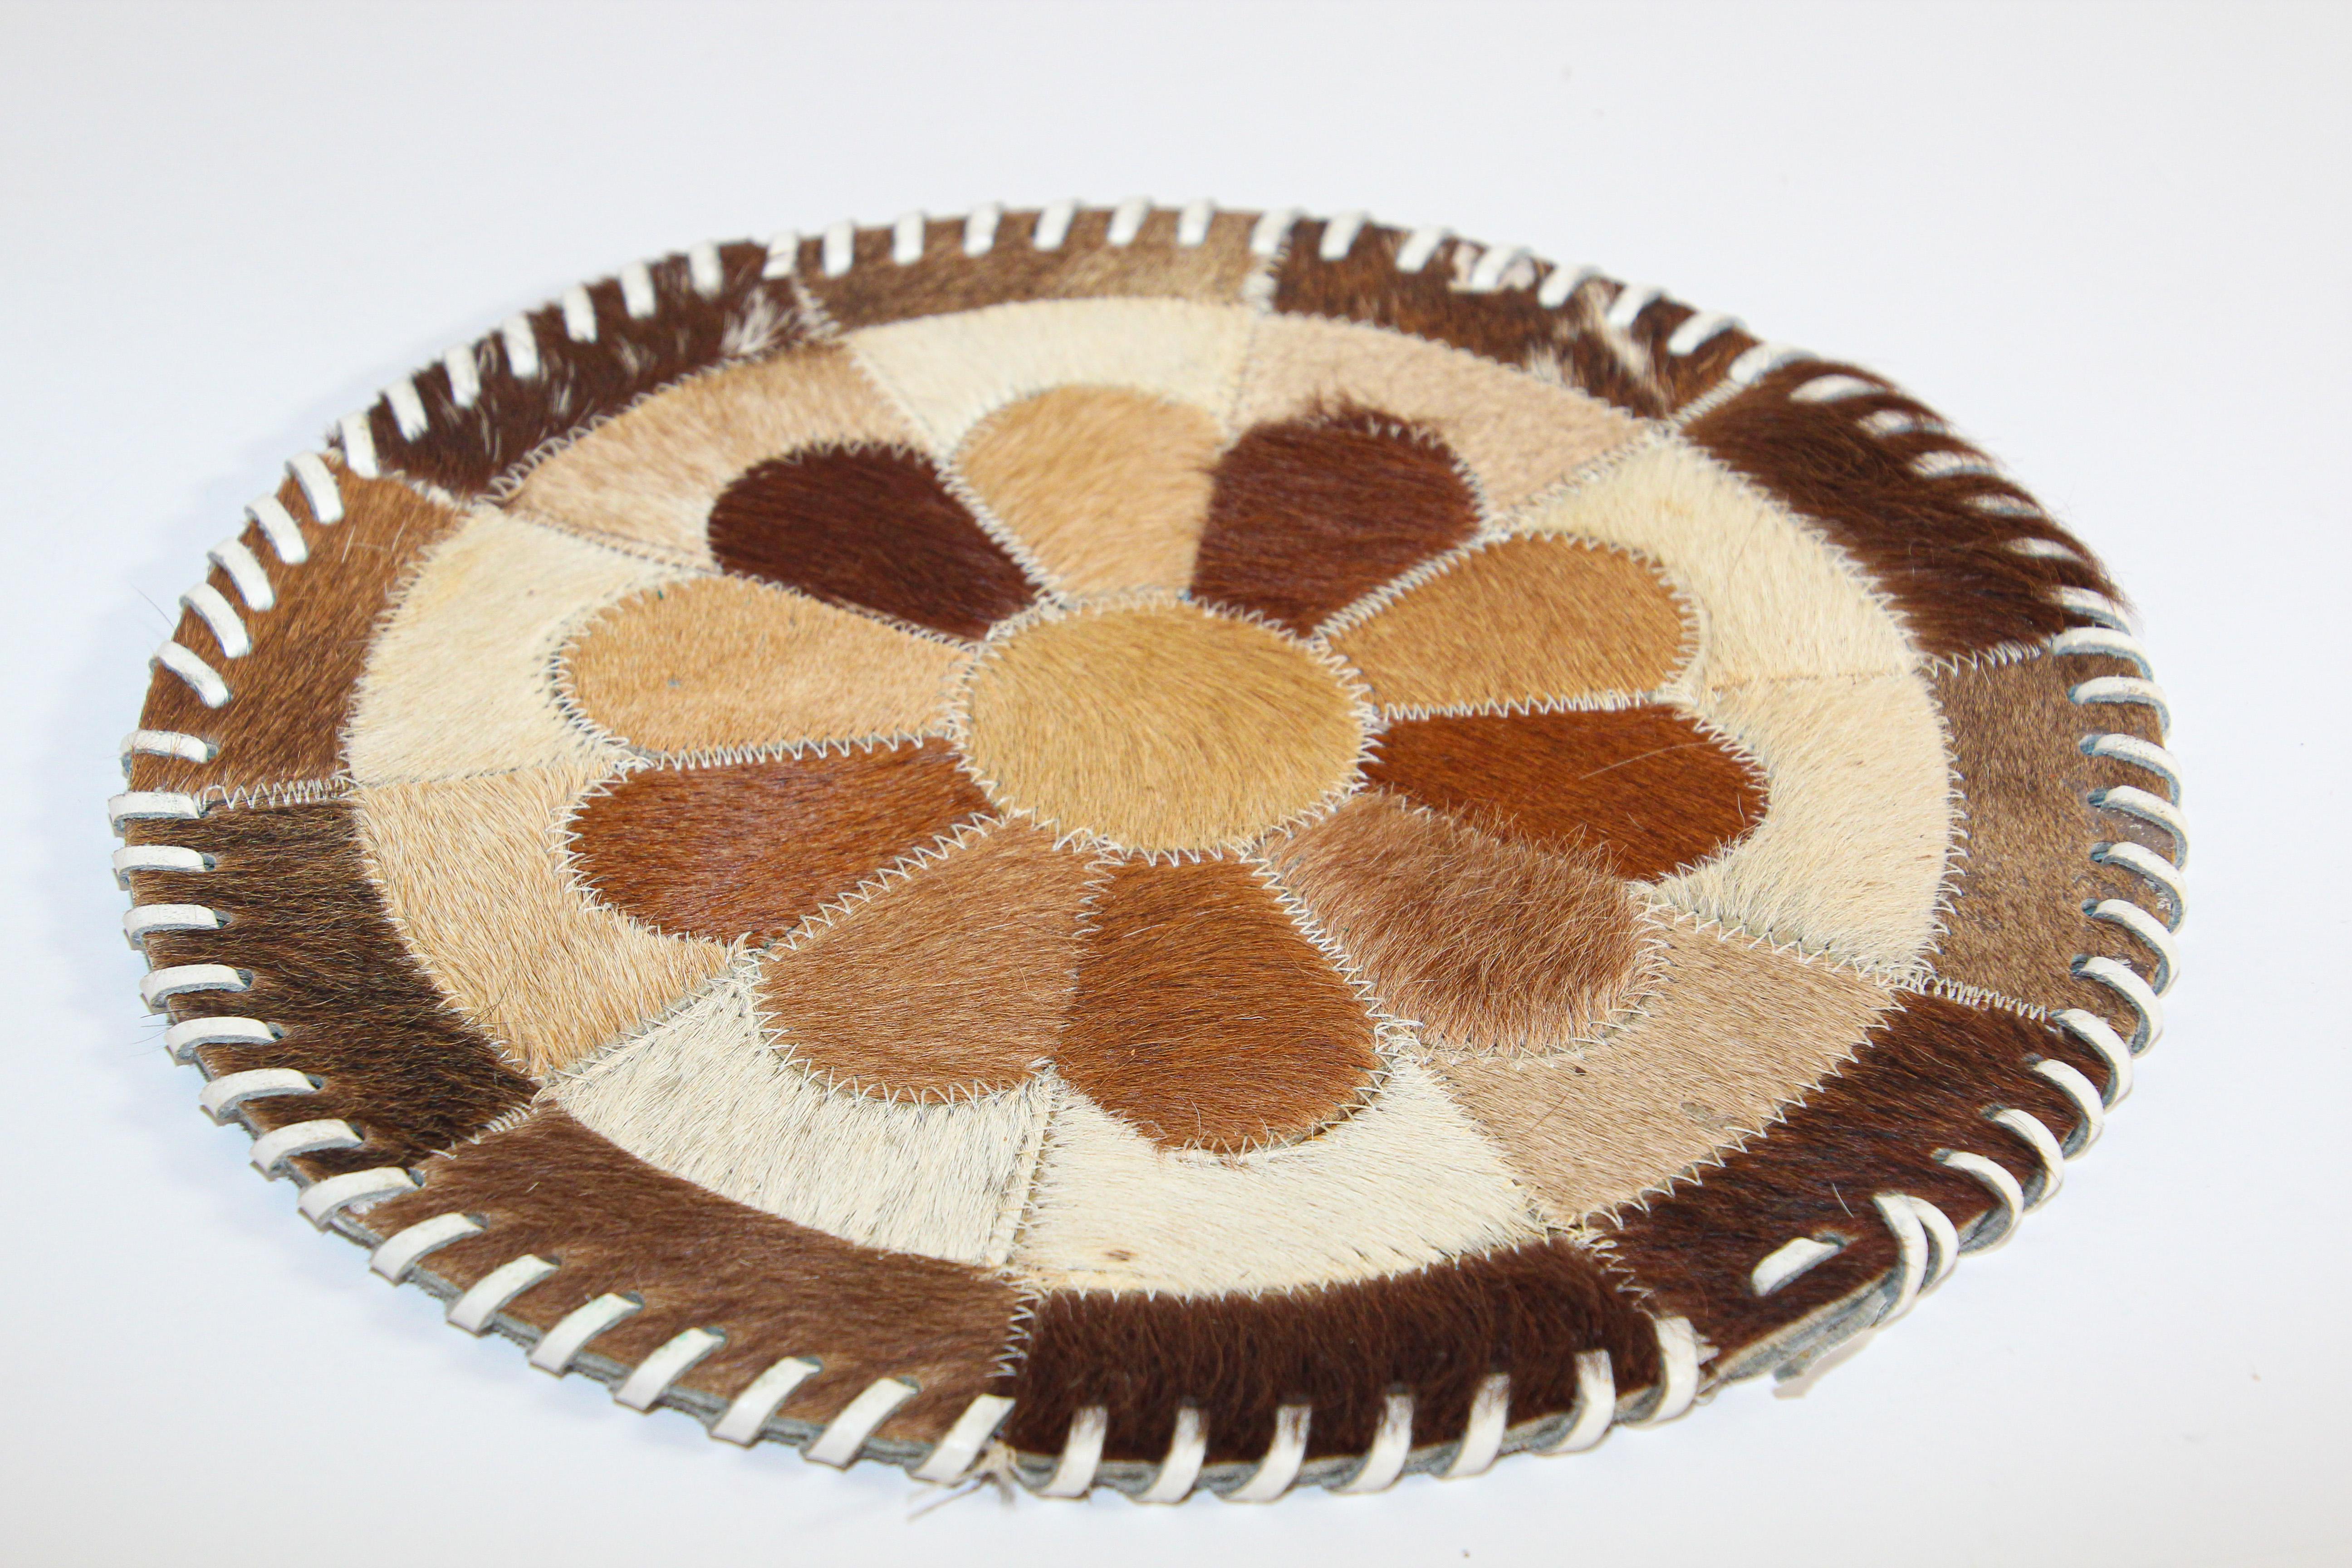 Handmade vintage south western leather cow hide round table mat.
Cowhide patchwork handcrafted from small pieces of leather and sewn together to create a beautiful pattern in shades of brown and white with white leather lacing.
The material is